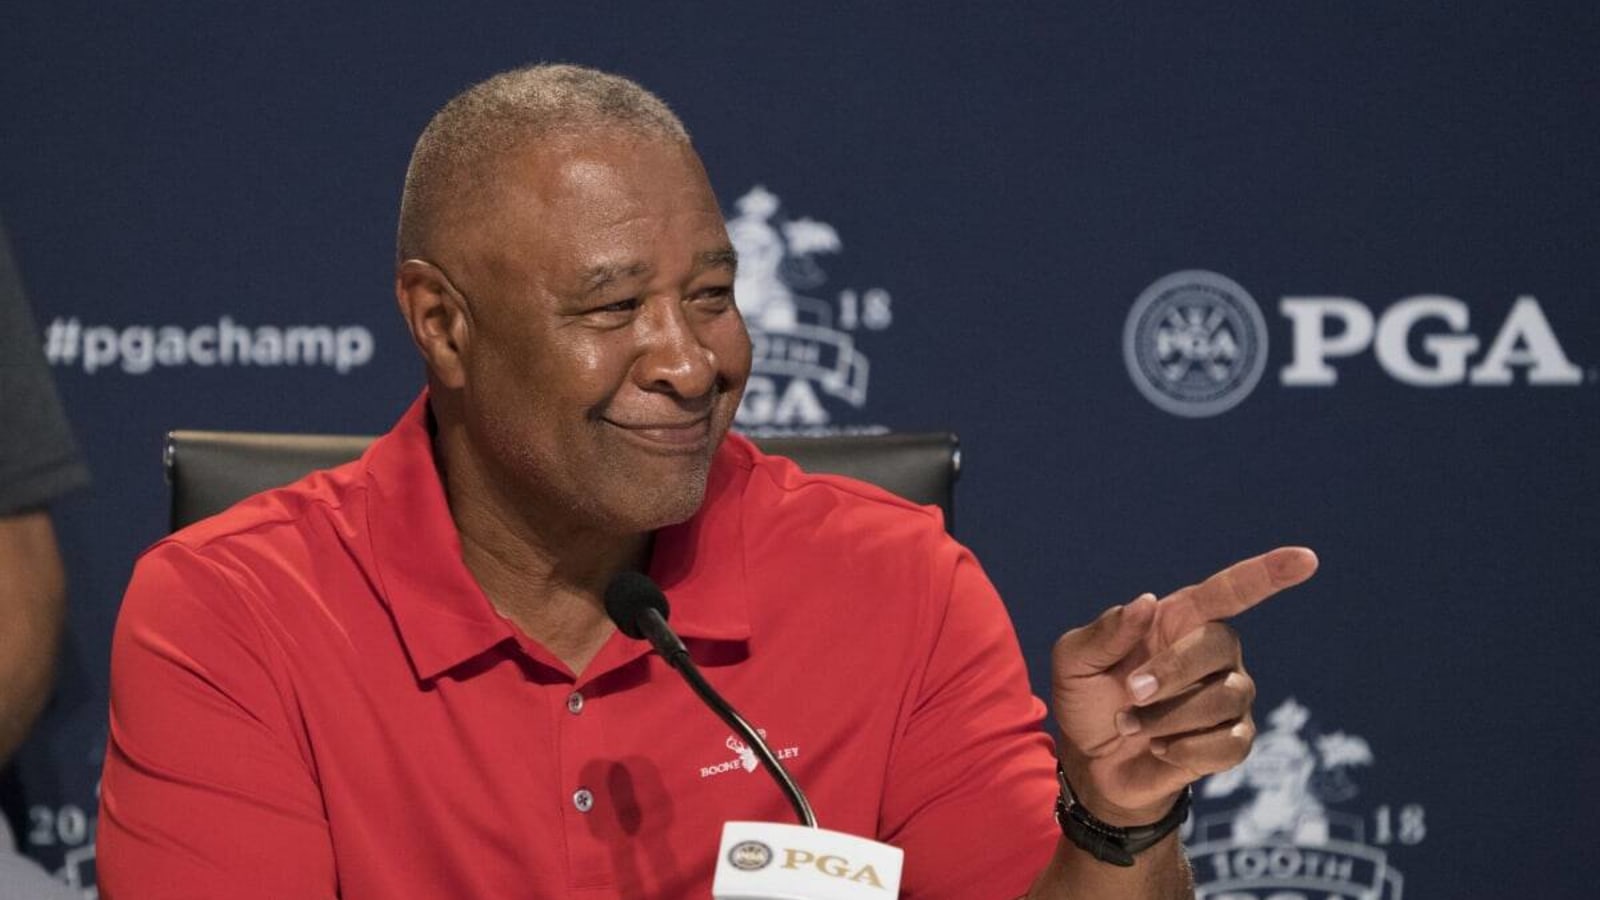 Ozzie Smith, Tyson Foods, and Black College Baseball World Series Addresses the Dearth of Black Players on MLB Rosters